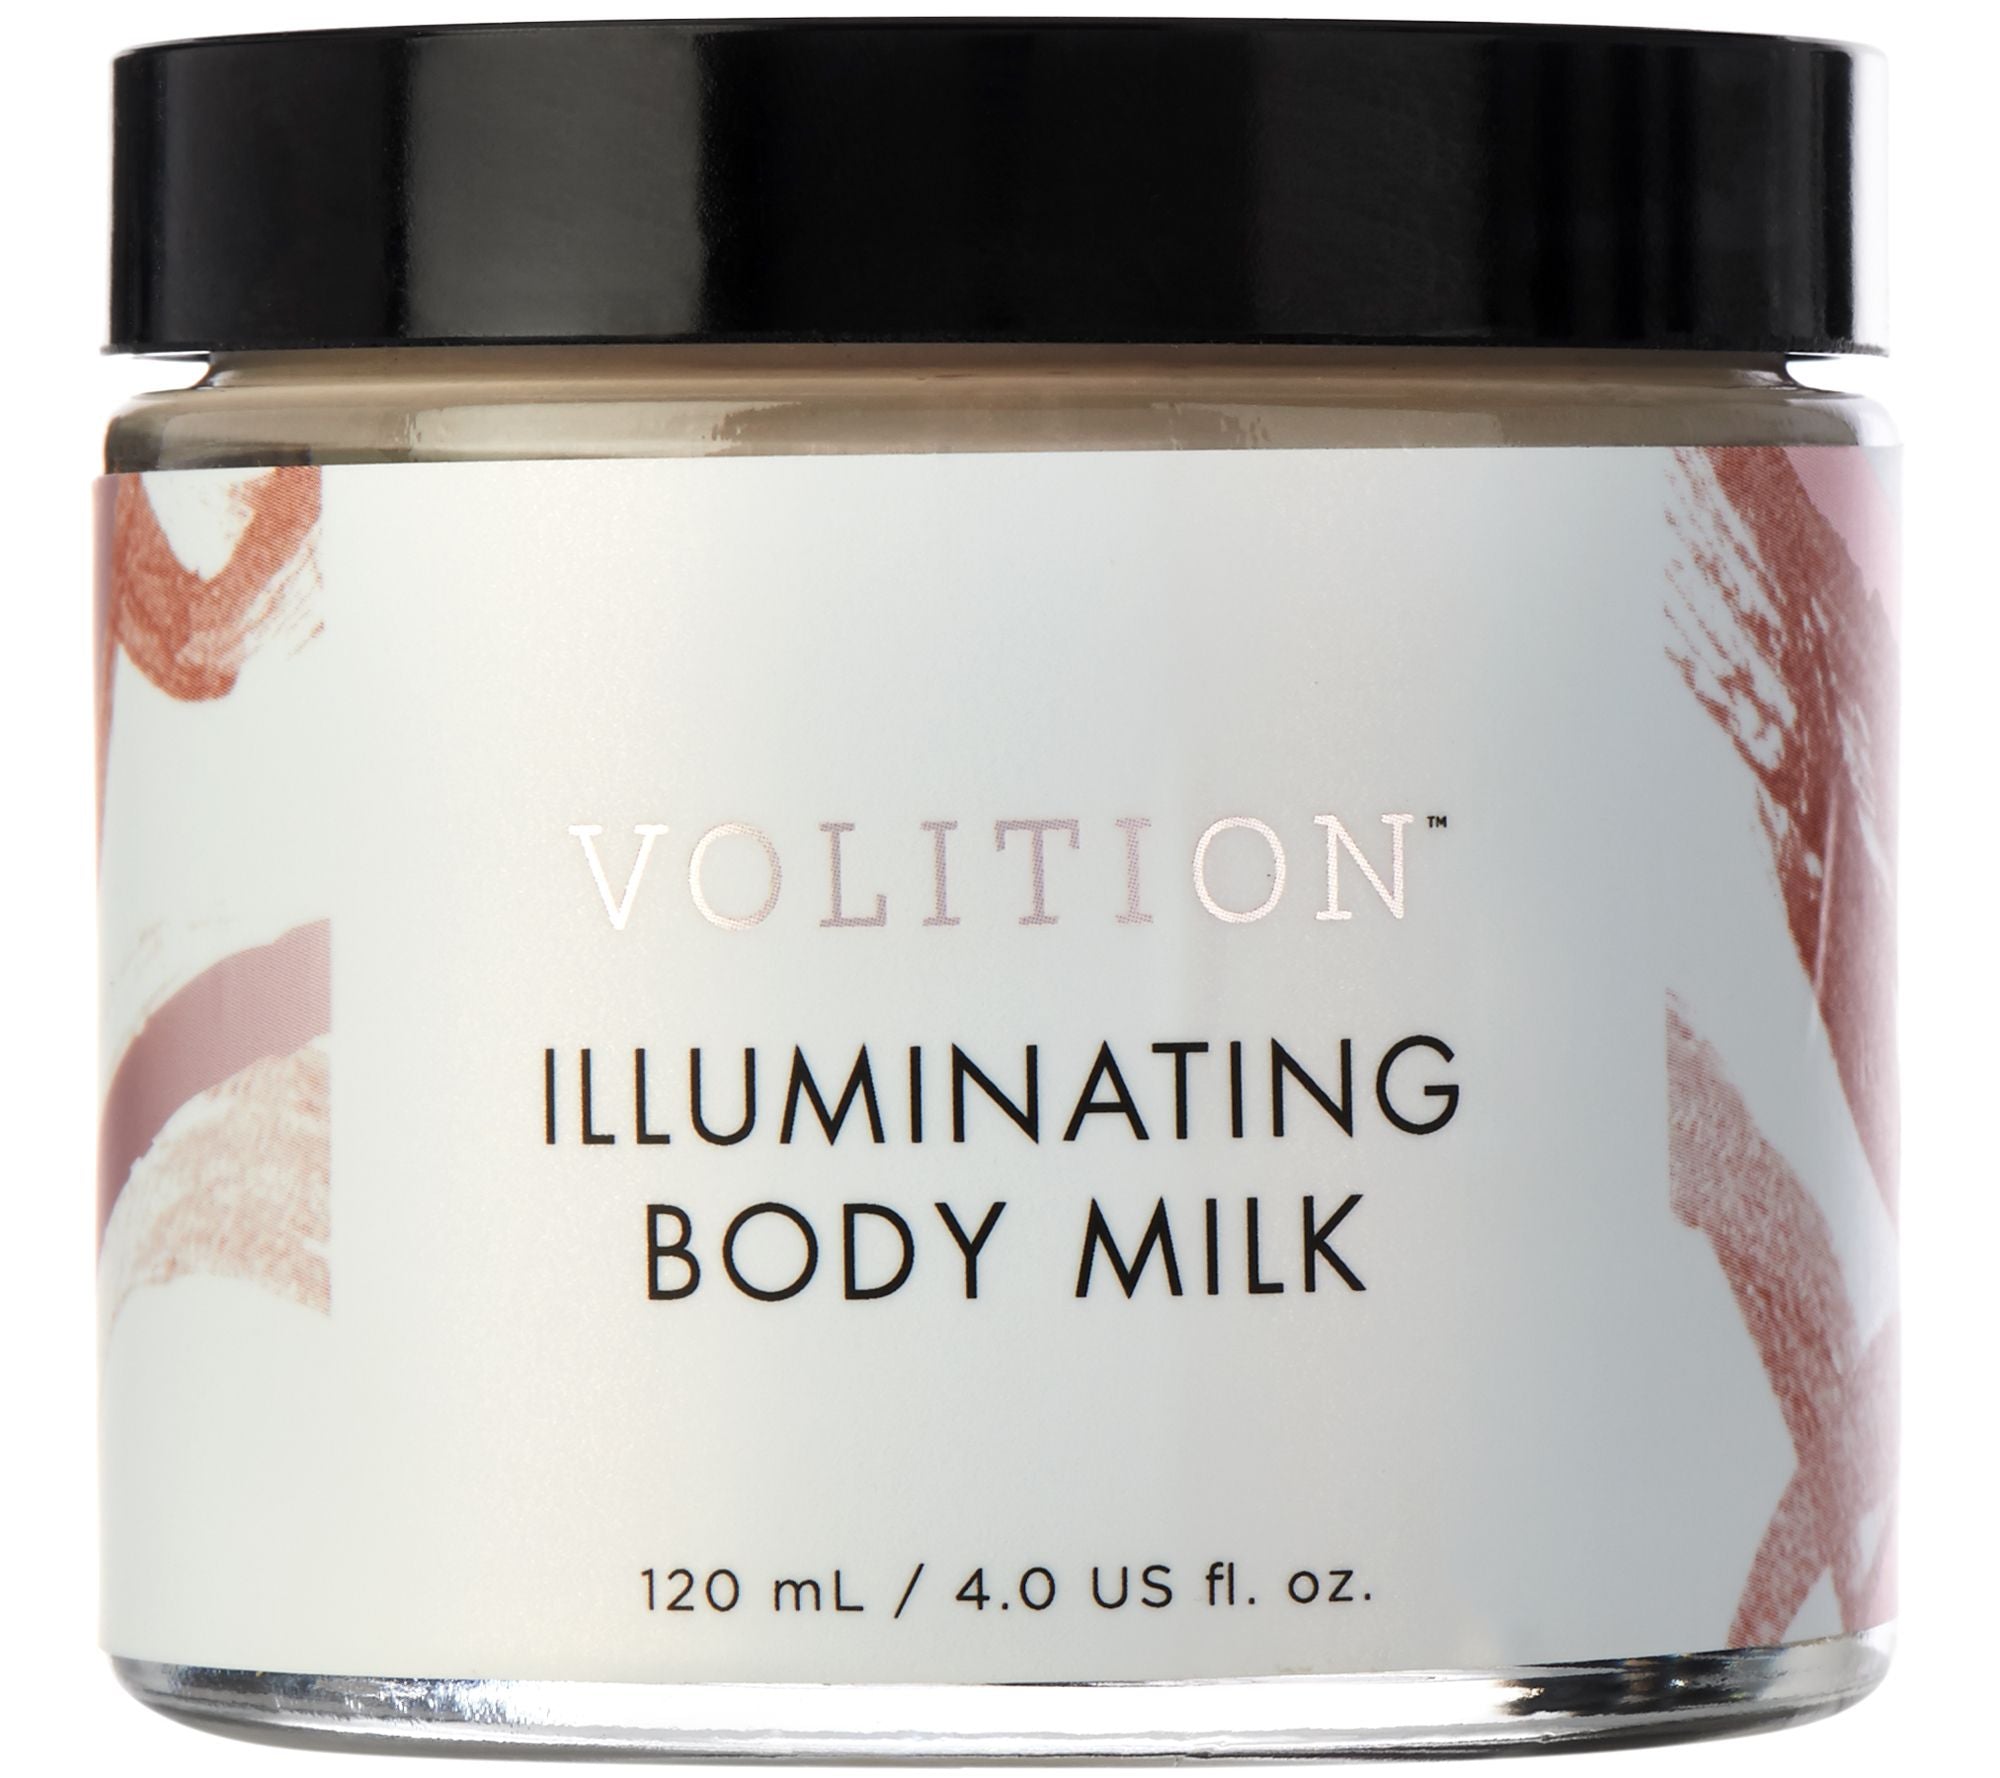 Skincare Product Review, Swatches, Photos,Trend 2016, 2017: Volition Beauty Illuminating Body Milk